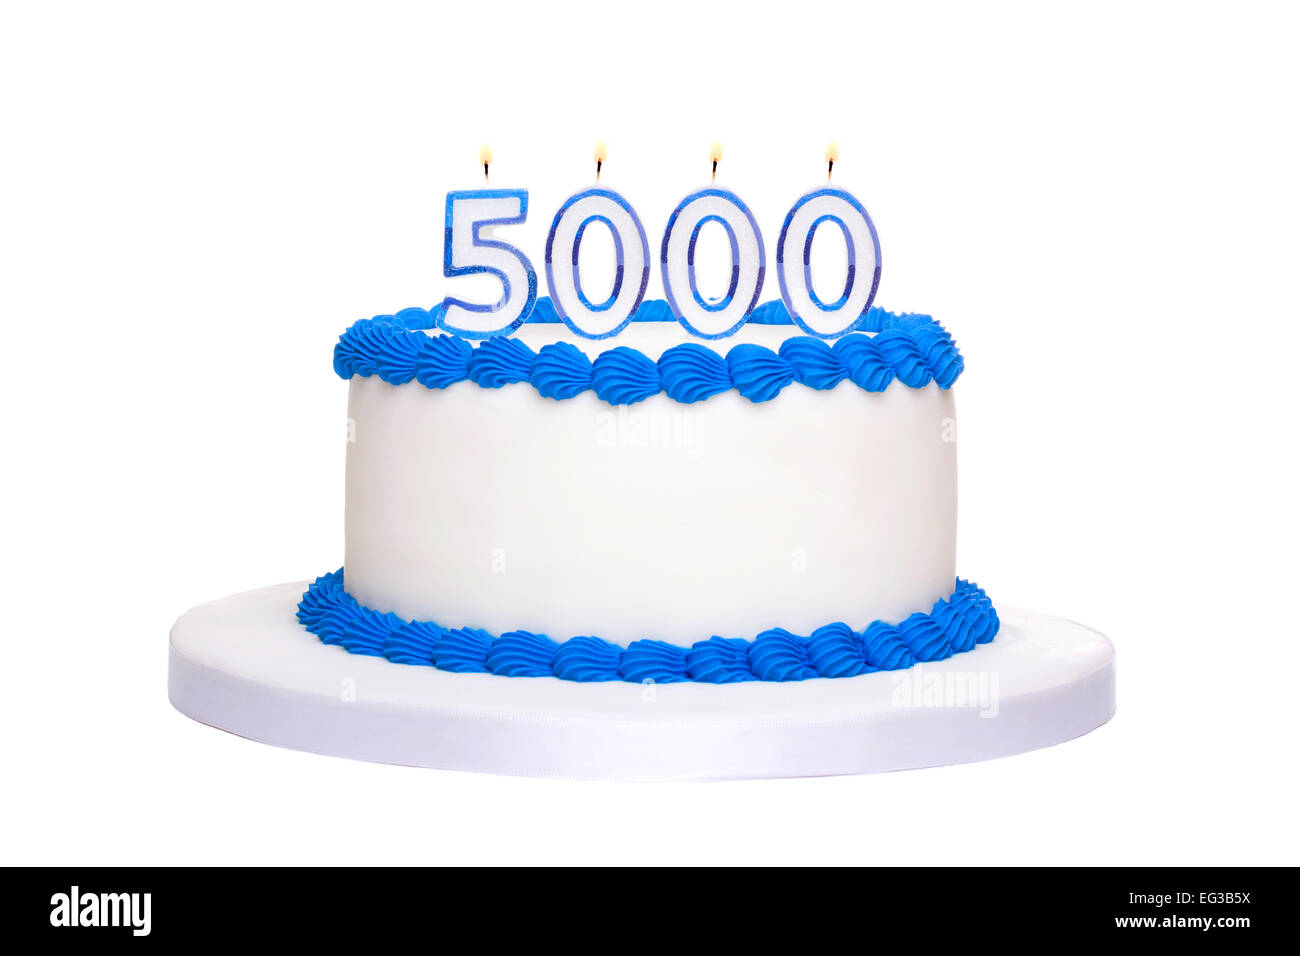 Birthday cake with candles reading 5000 Stock Photo